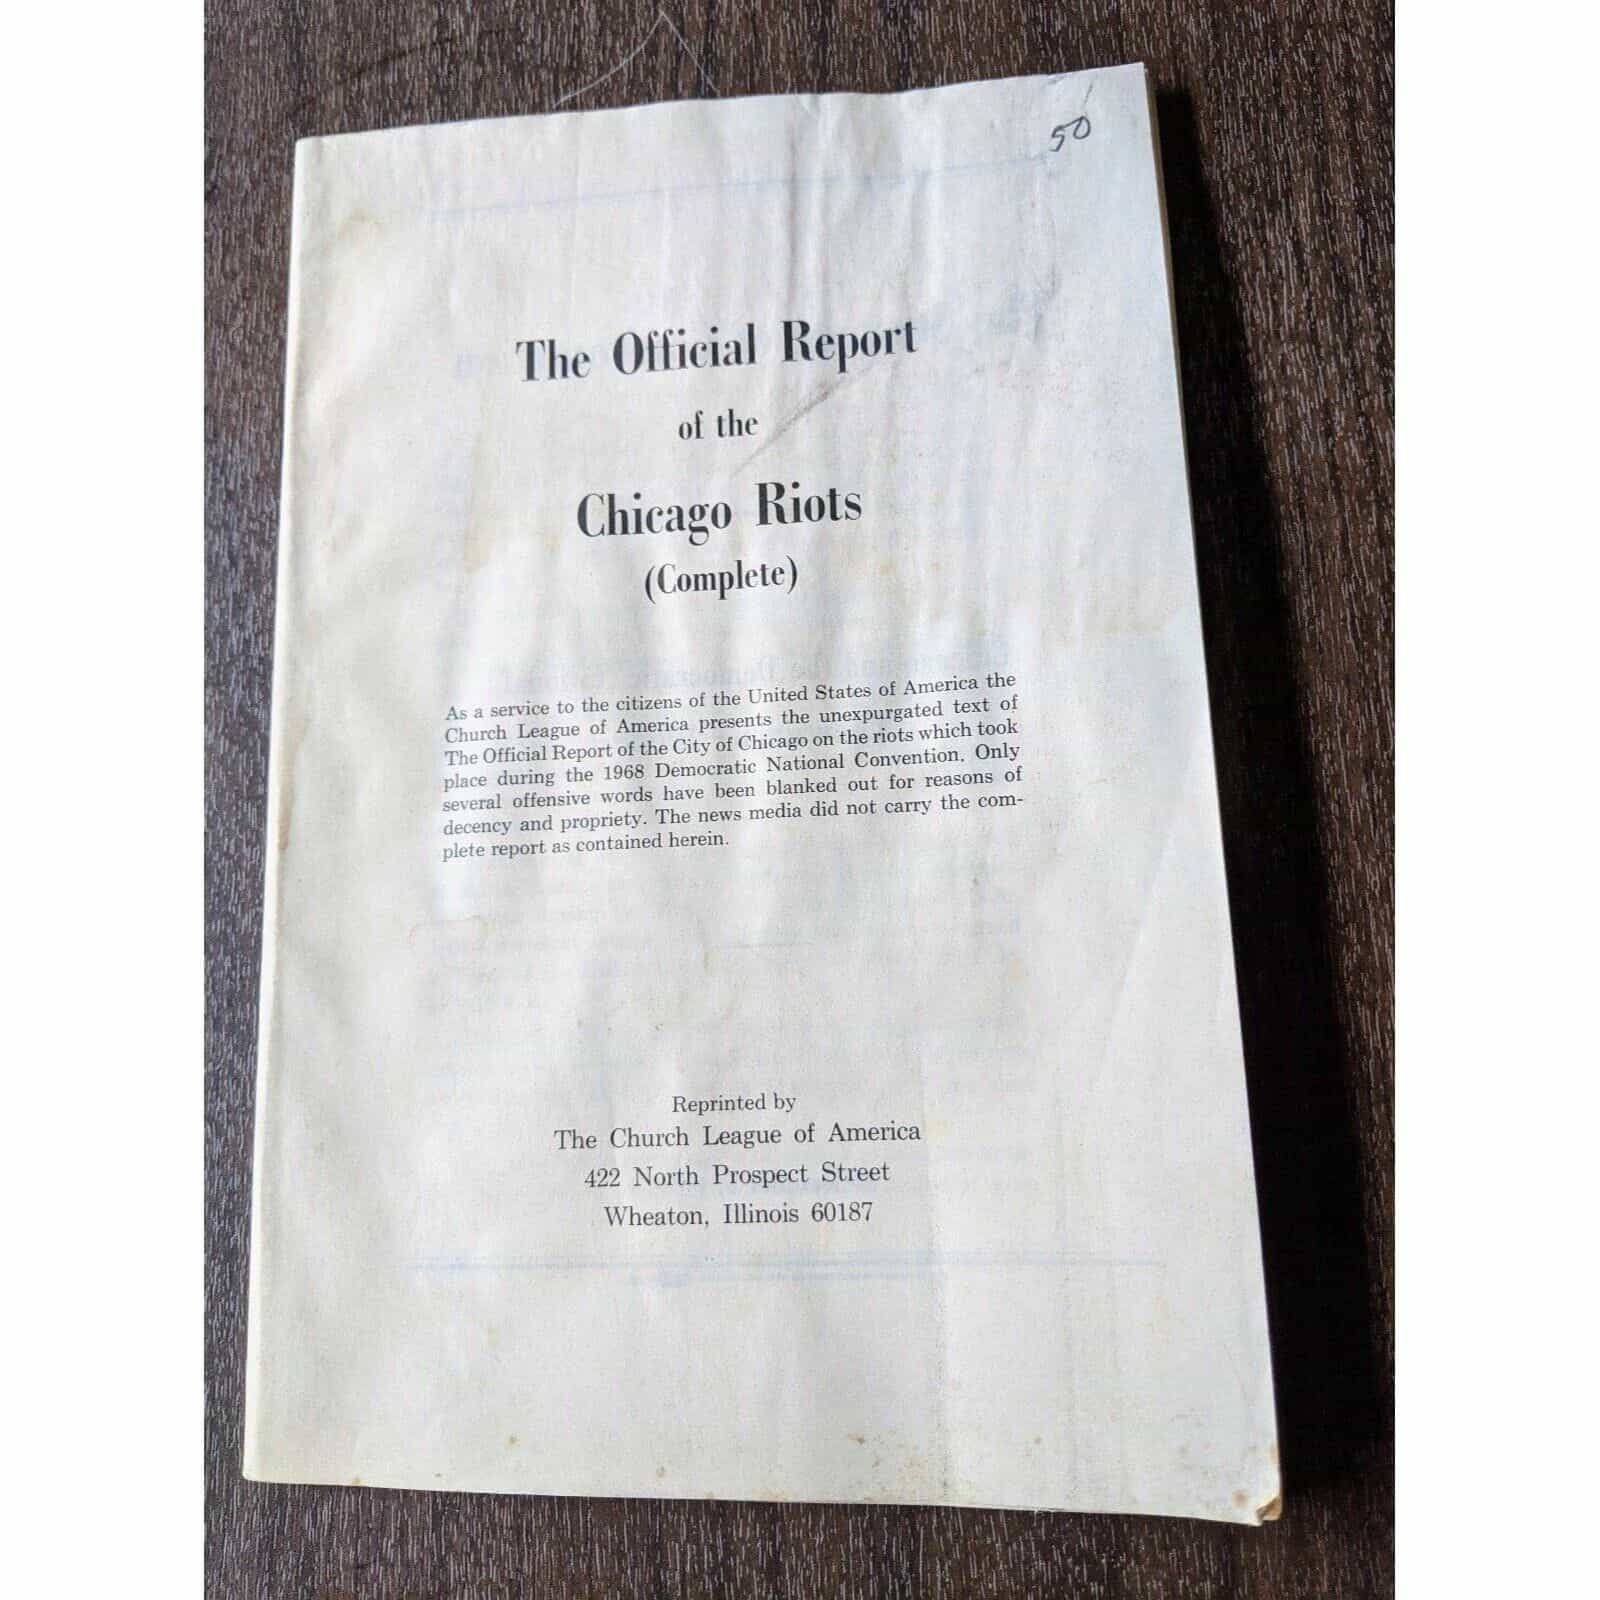 The Official Report of the Chicago Riots (complete) Booklet